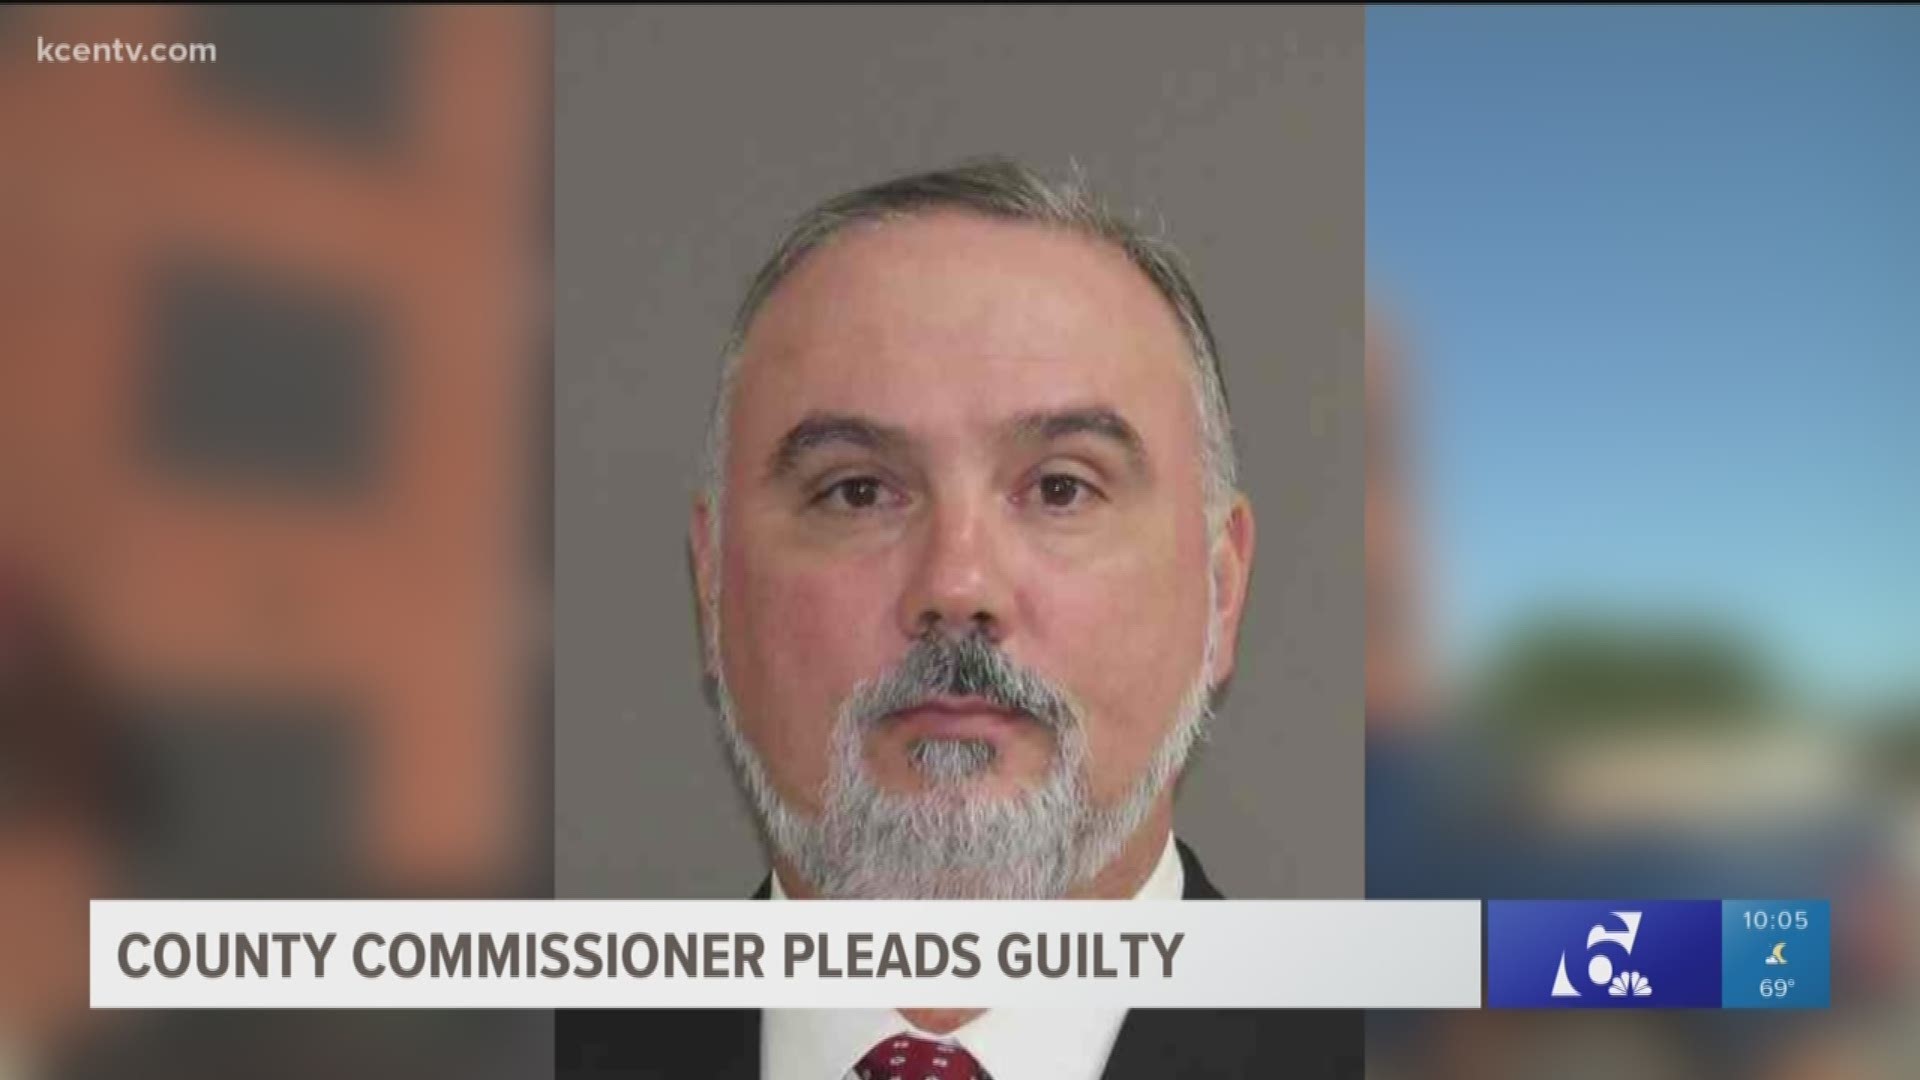 A Leon County Commissioner pleaded guilty to assault causing body injury after assaulting his wife in March.